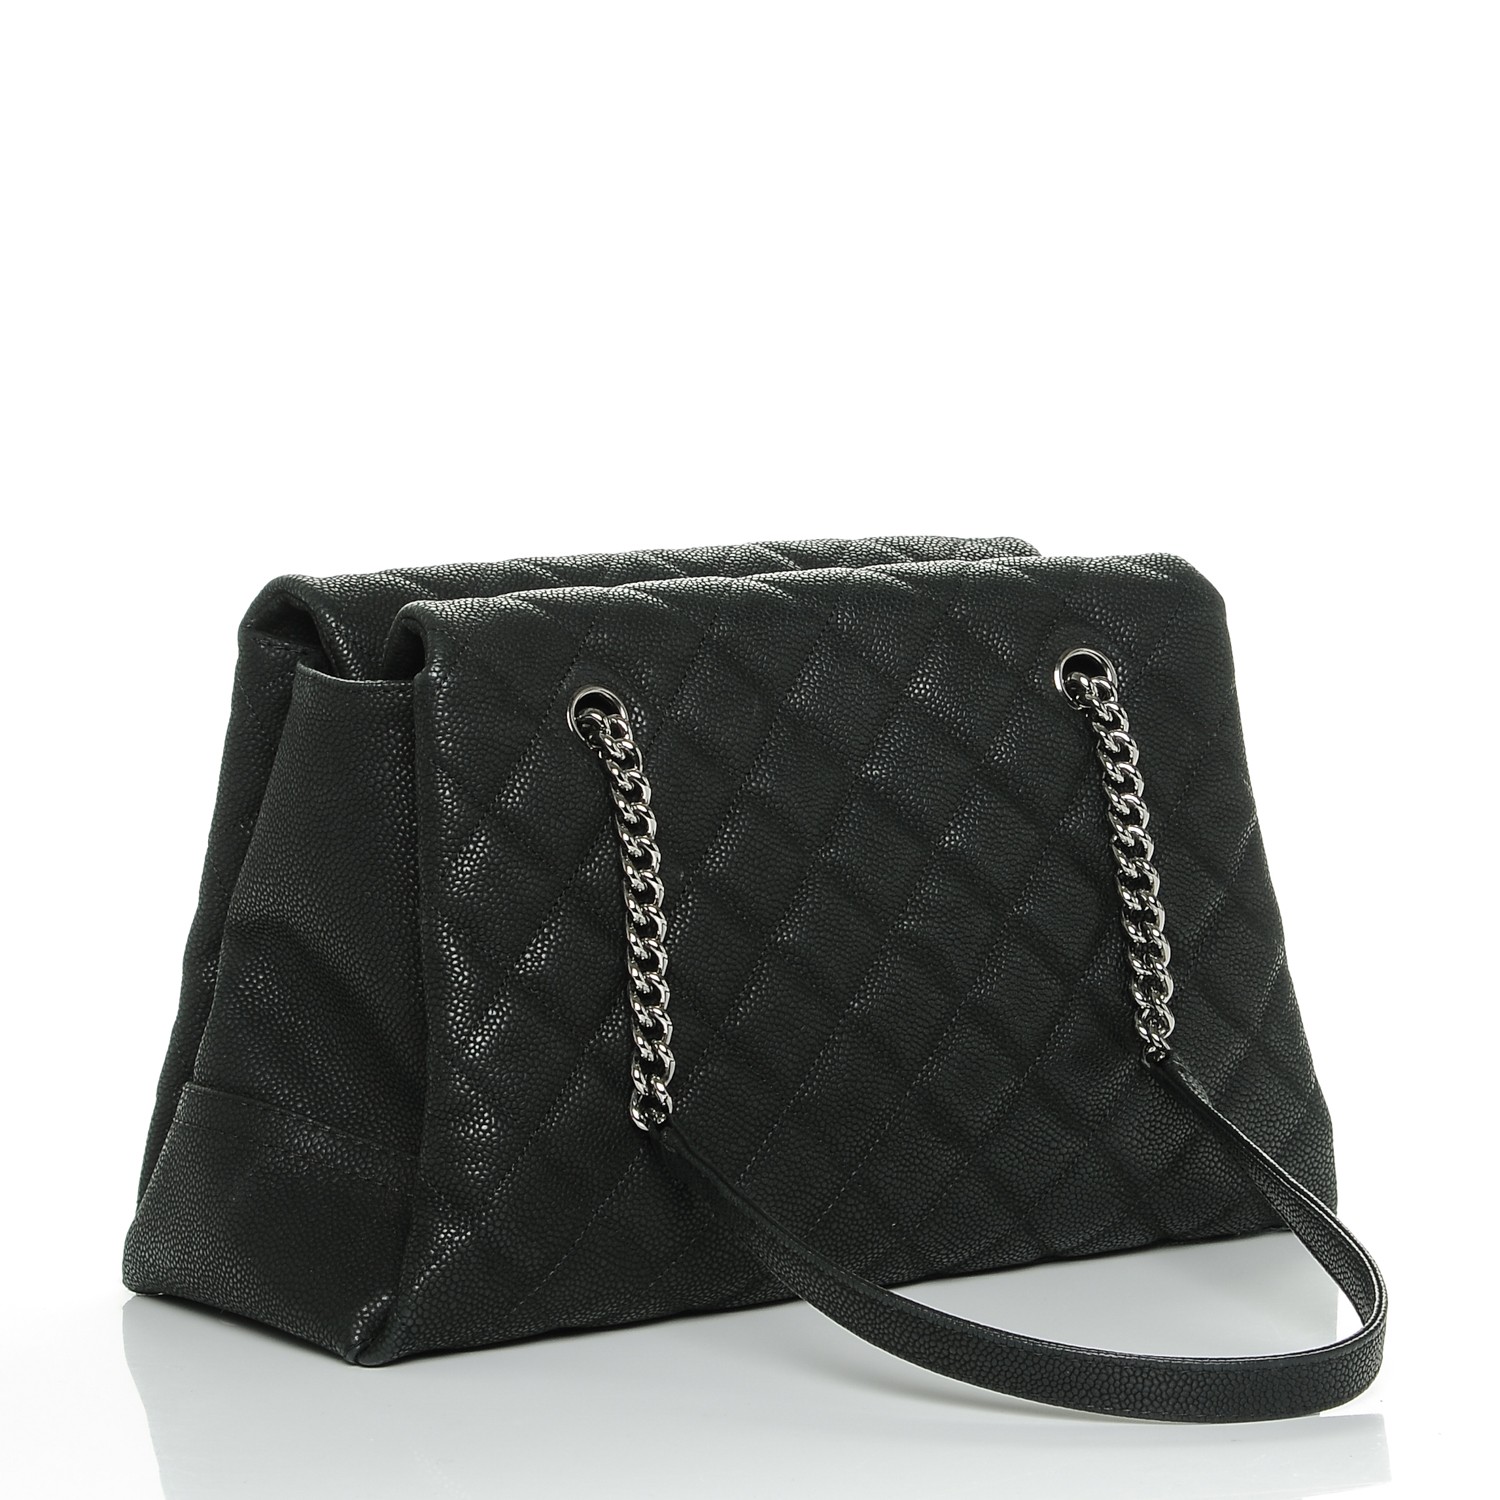 CHANEL Iridescent Caviar Quilted Lady Pearly Tote Black 187902